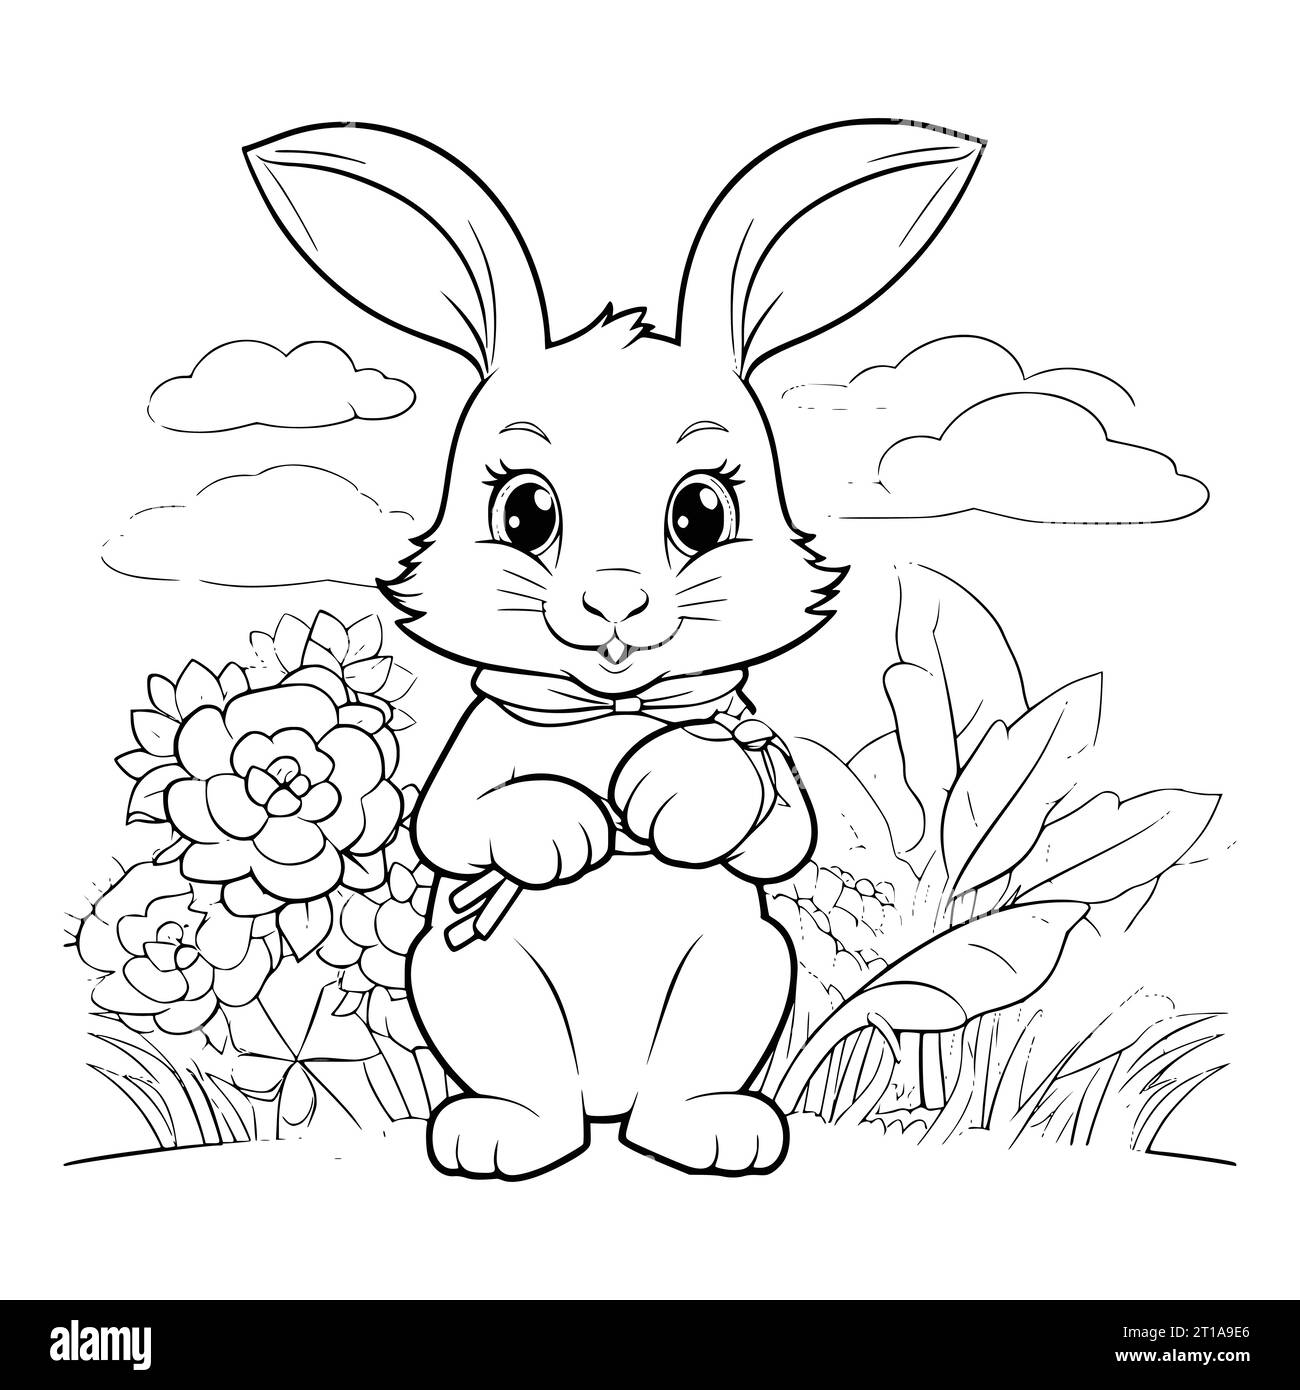 Bunny With A Ripe Tasty Carrot Coloring Page For Kids Stock Vector